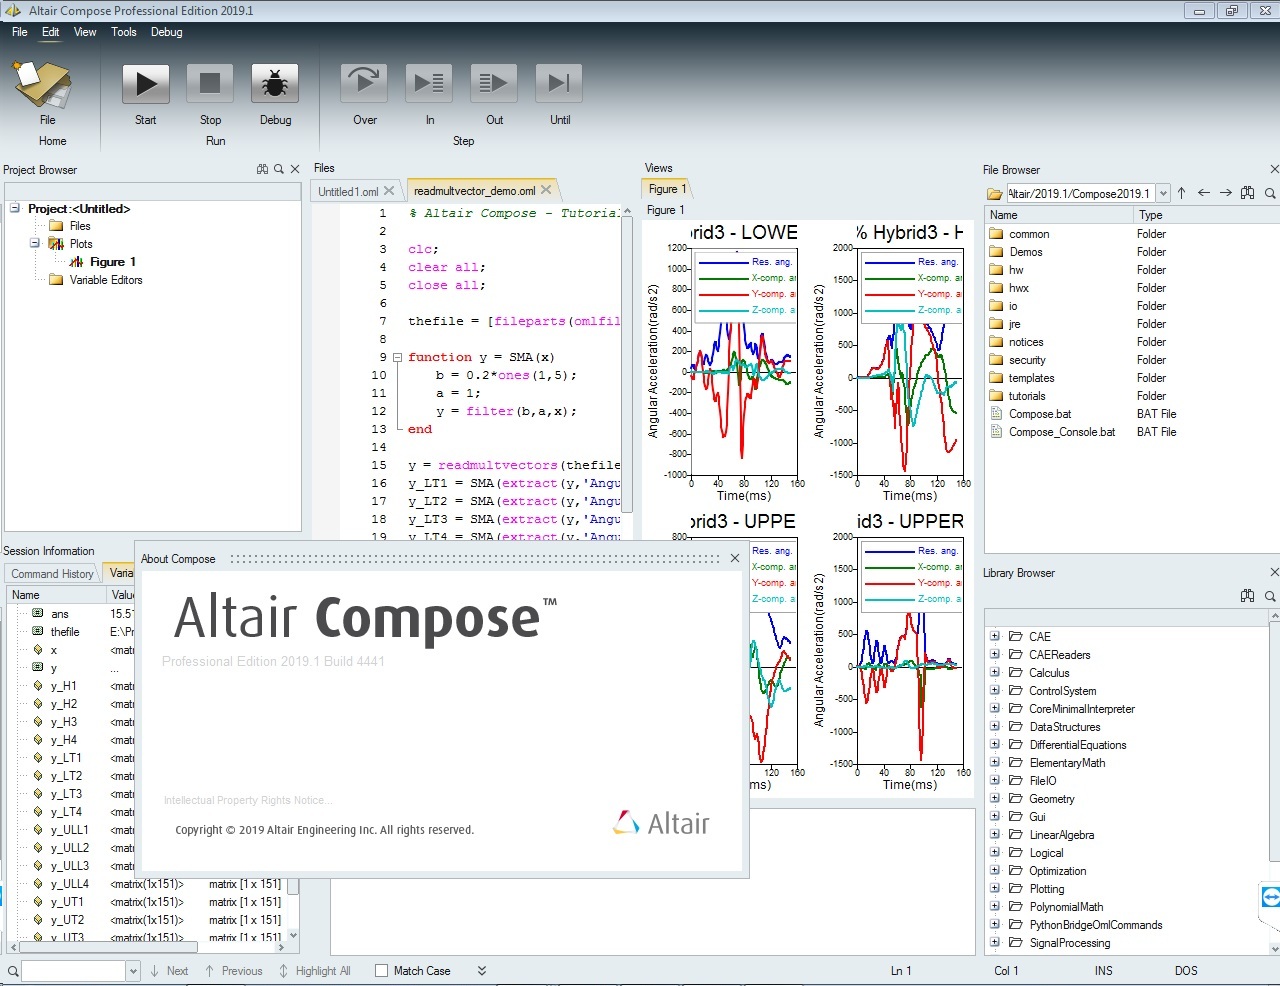 Working with Altair Compose 2019.1 full license